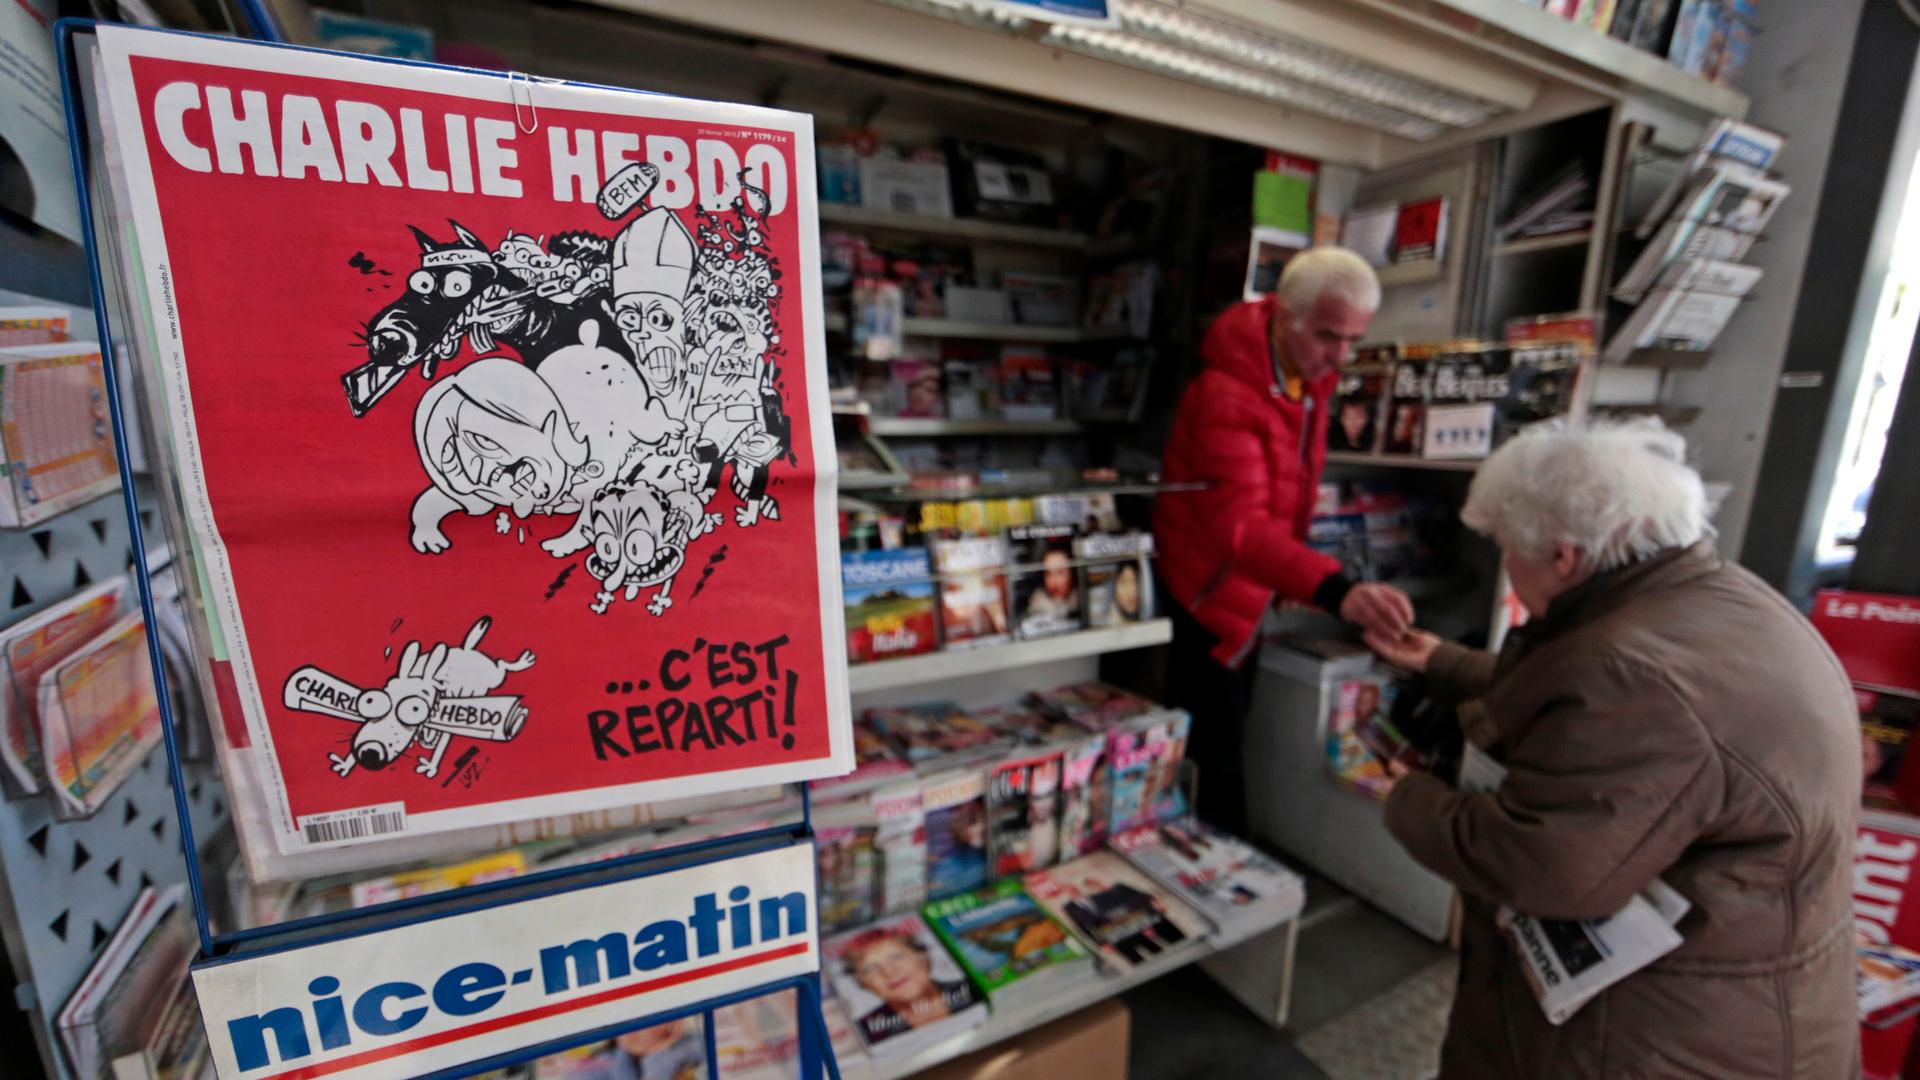 The front page of satirical French weekly Charlie Hebdo, entitled "C'est Reparti" ("Here we go again") is displayed at a kiosk in Nice on February 25, 2015.